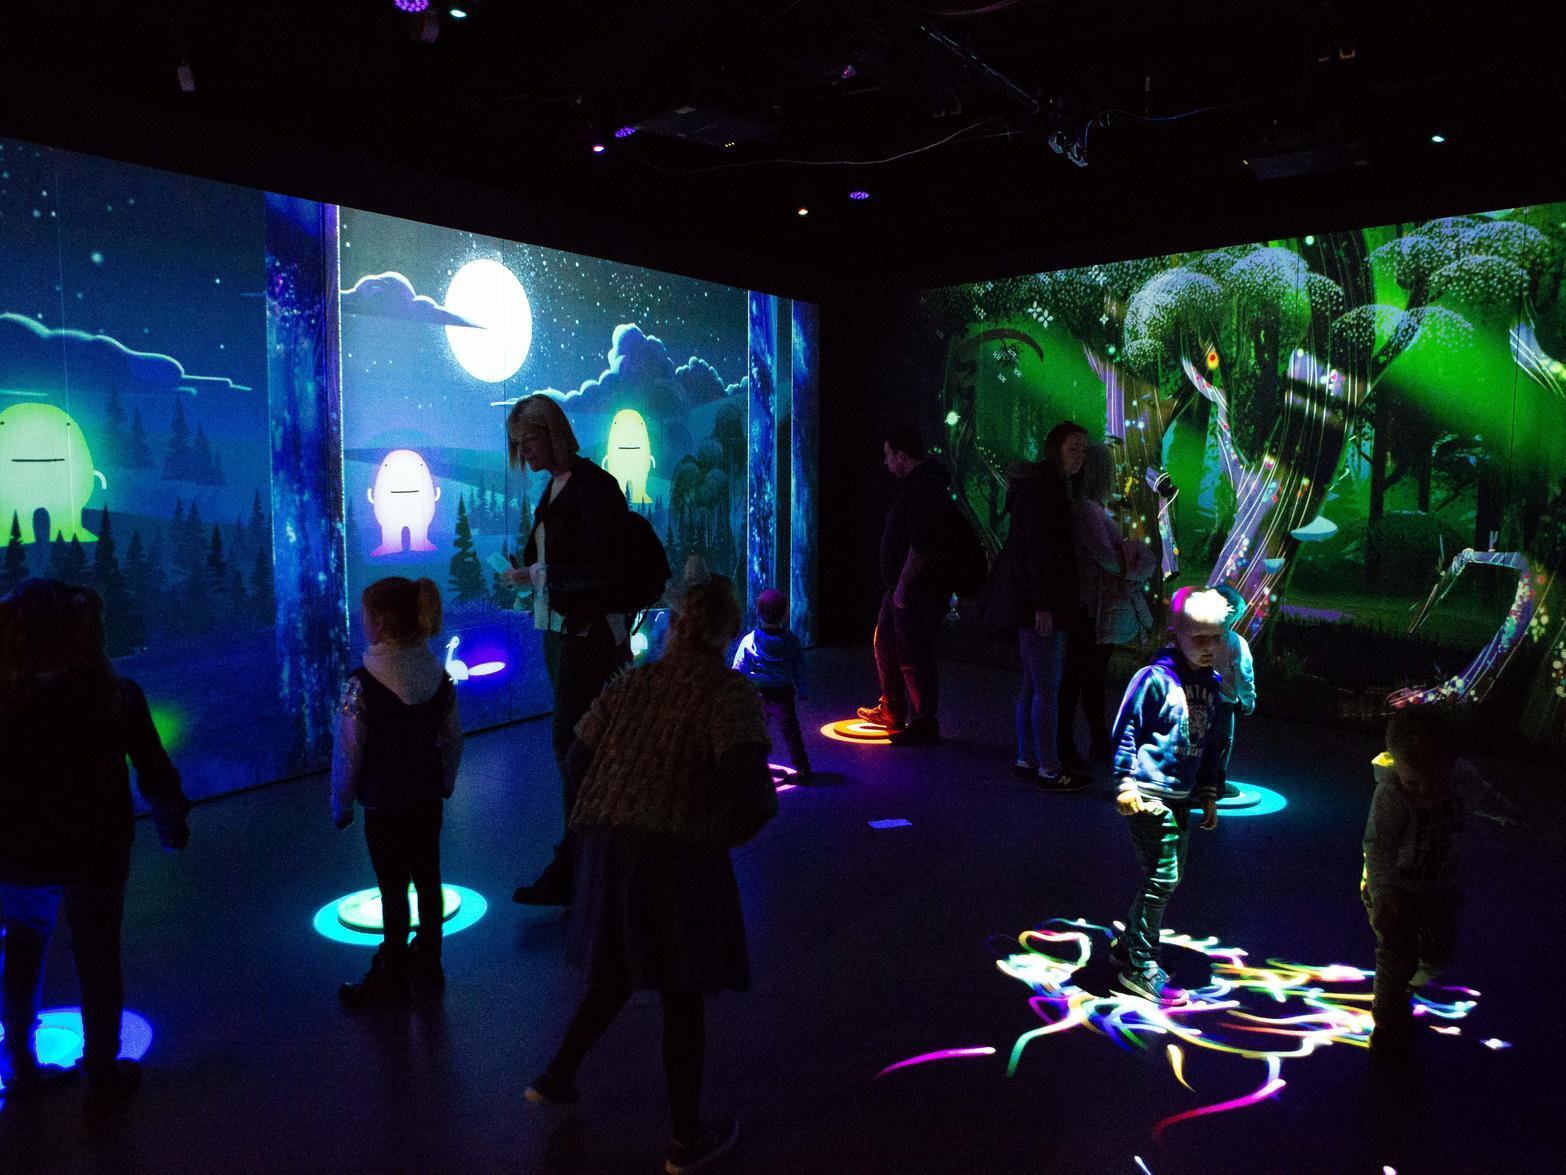 Eureka!'s digital forest exhibition, Arboreal. Photo by Bruce Fitzgerald.